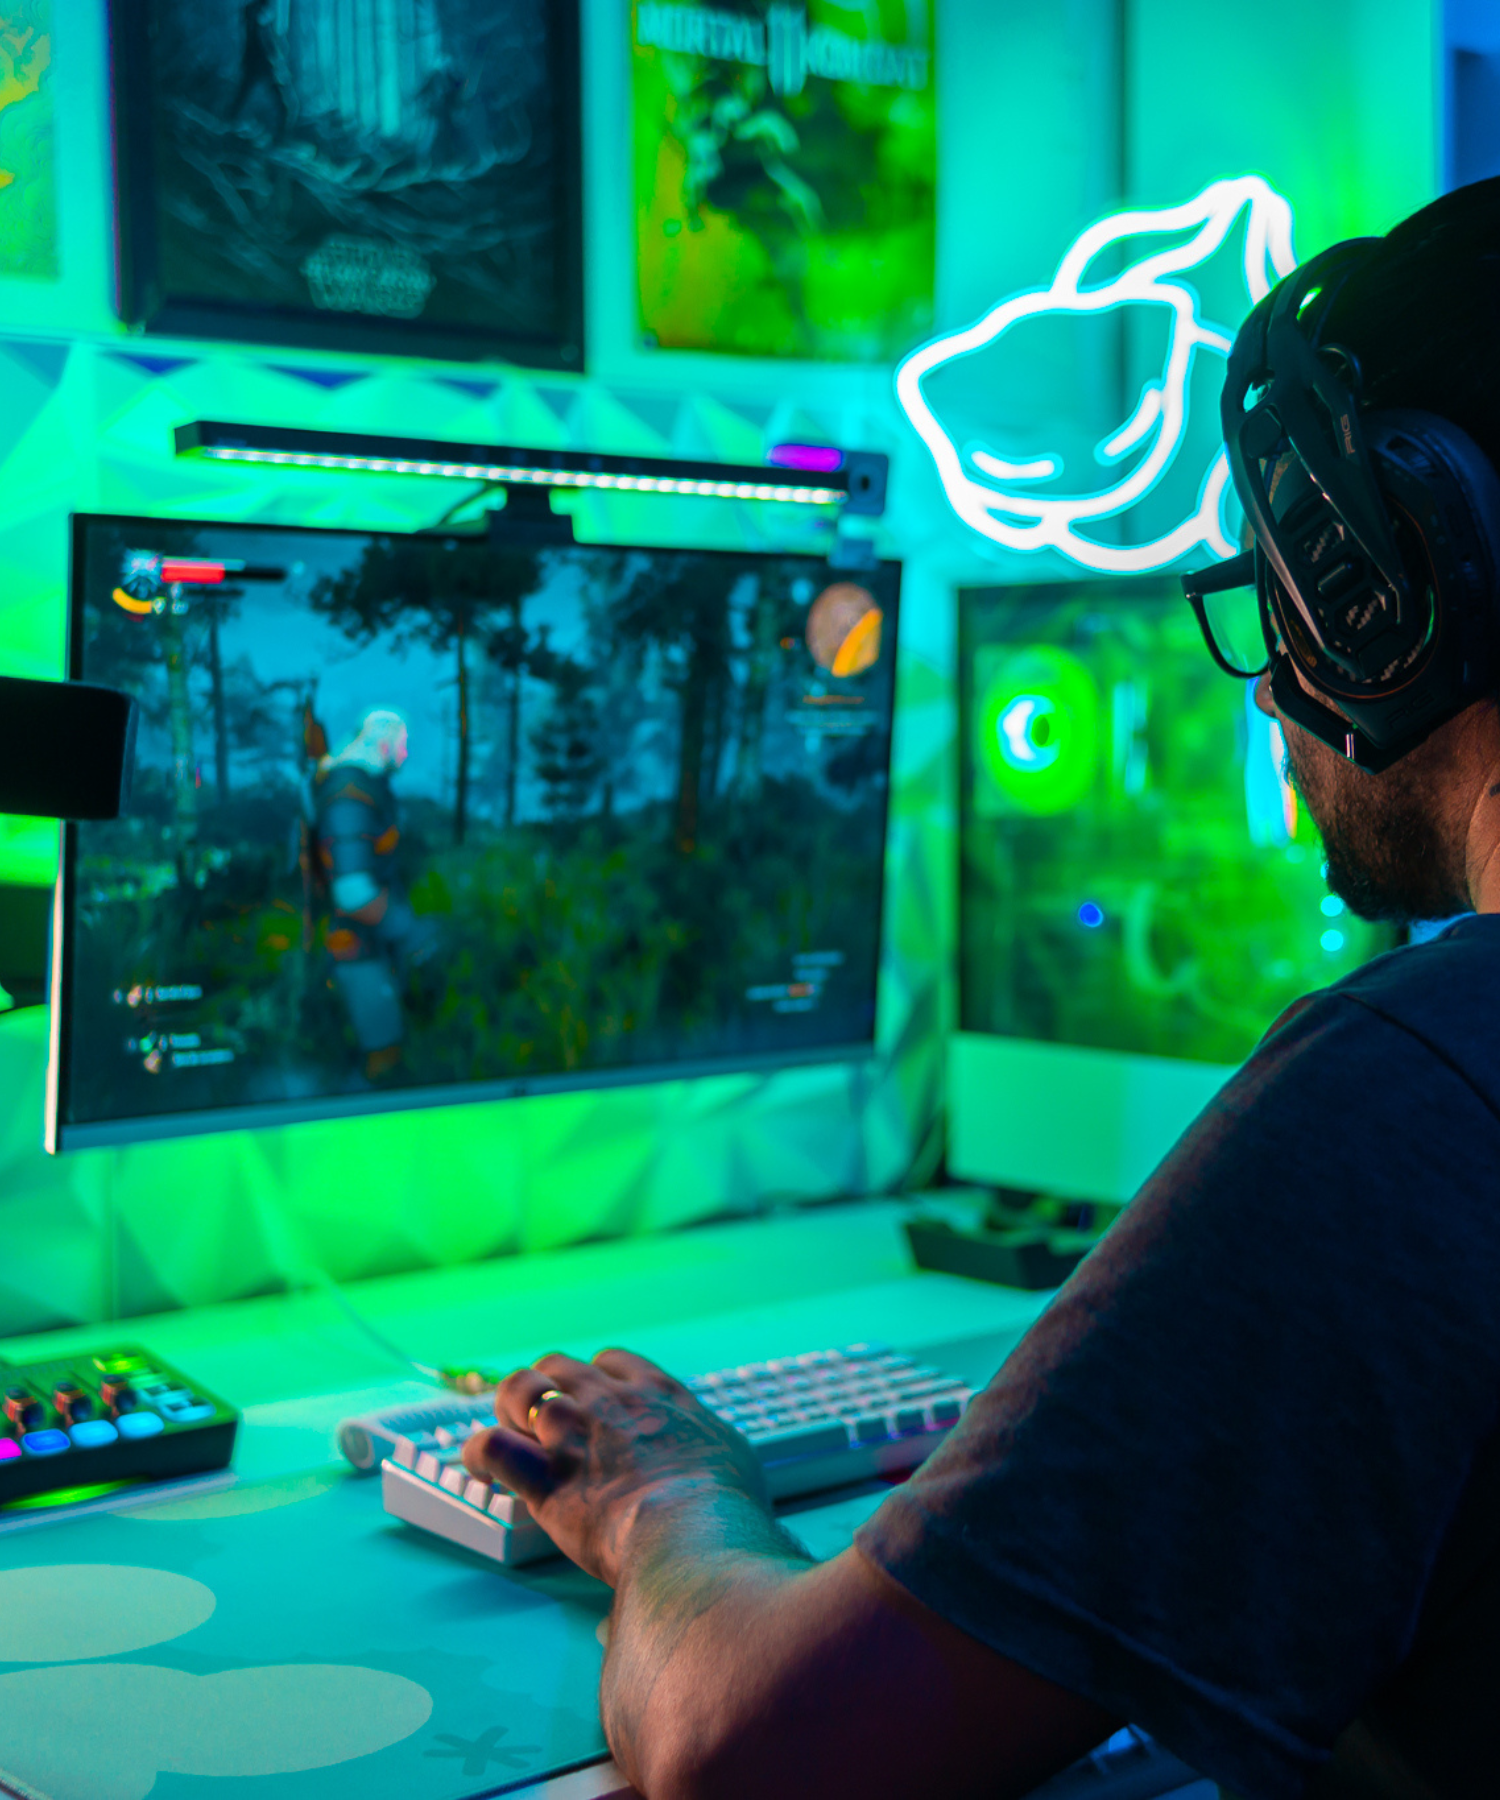 Gamer playing witcher 3 in a green gaming setup